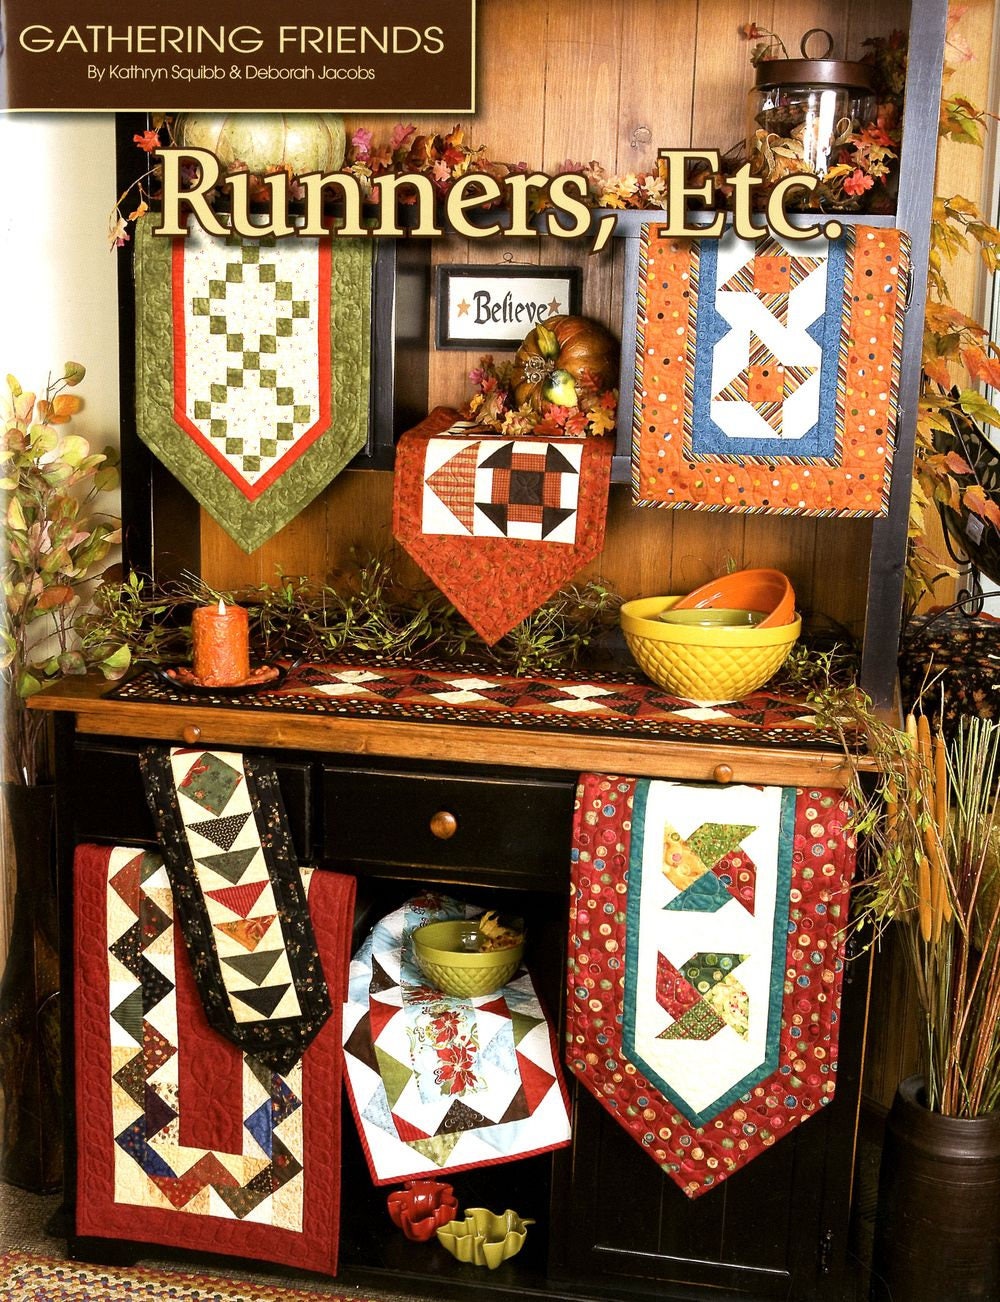 Runners, Etc. Quilt Pattern Book by Kathryn Squibb of Gathering Friends